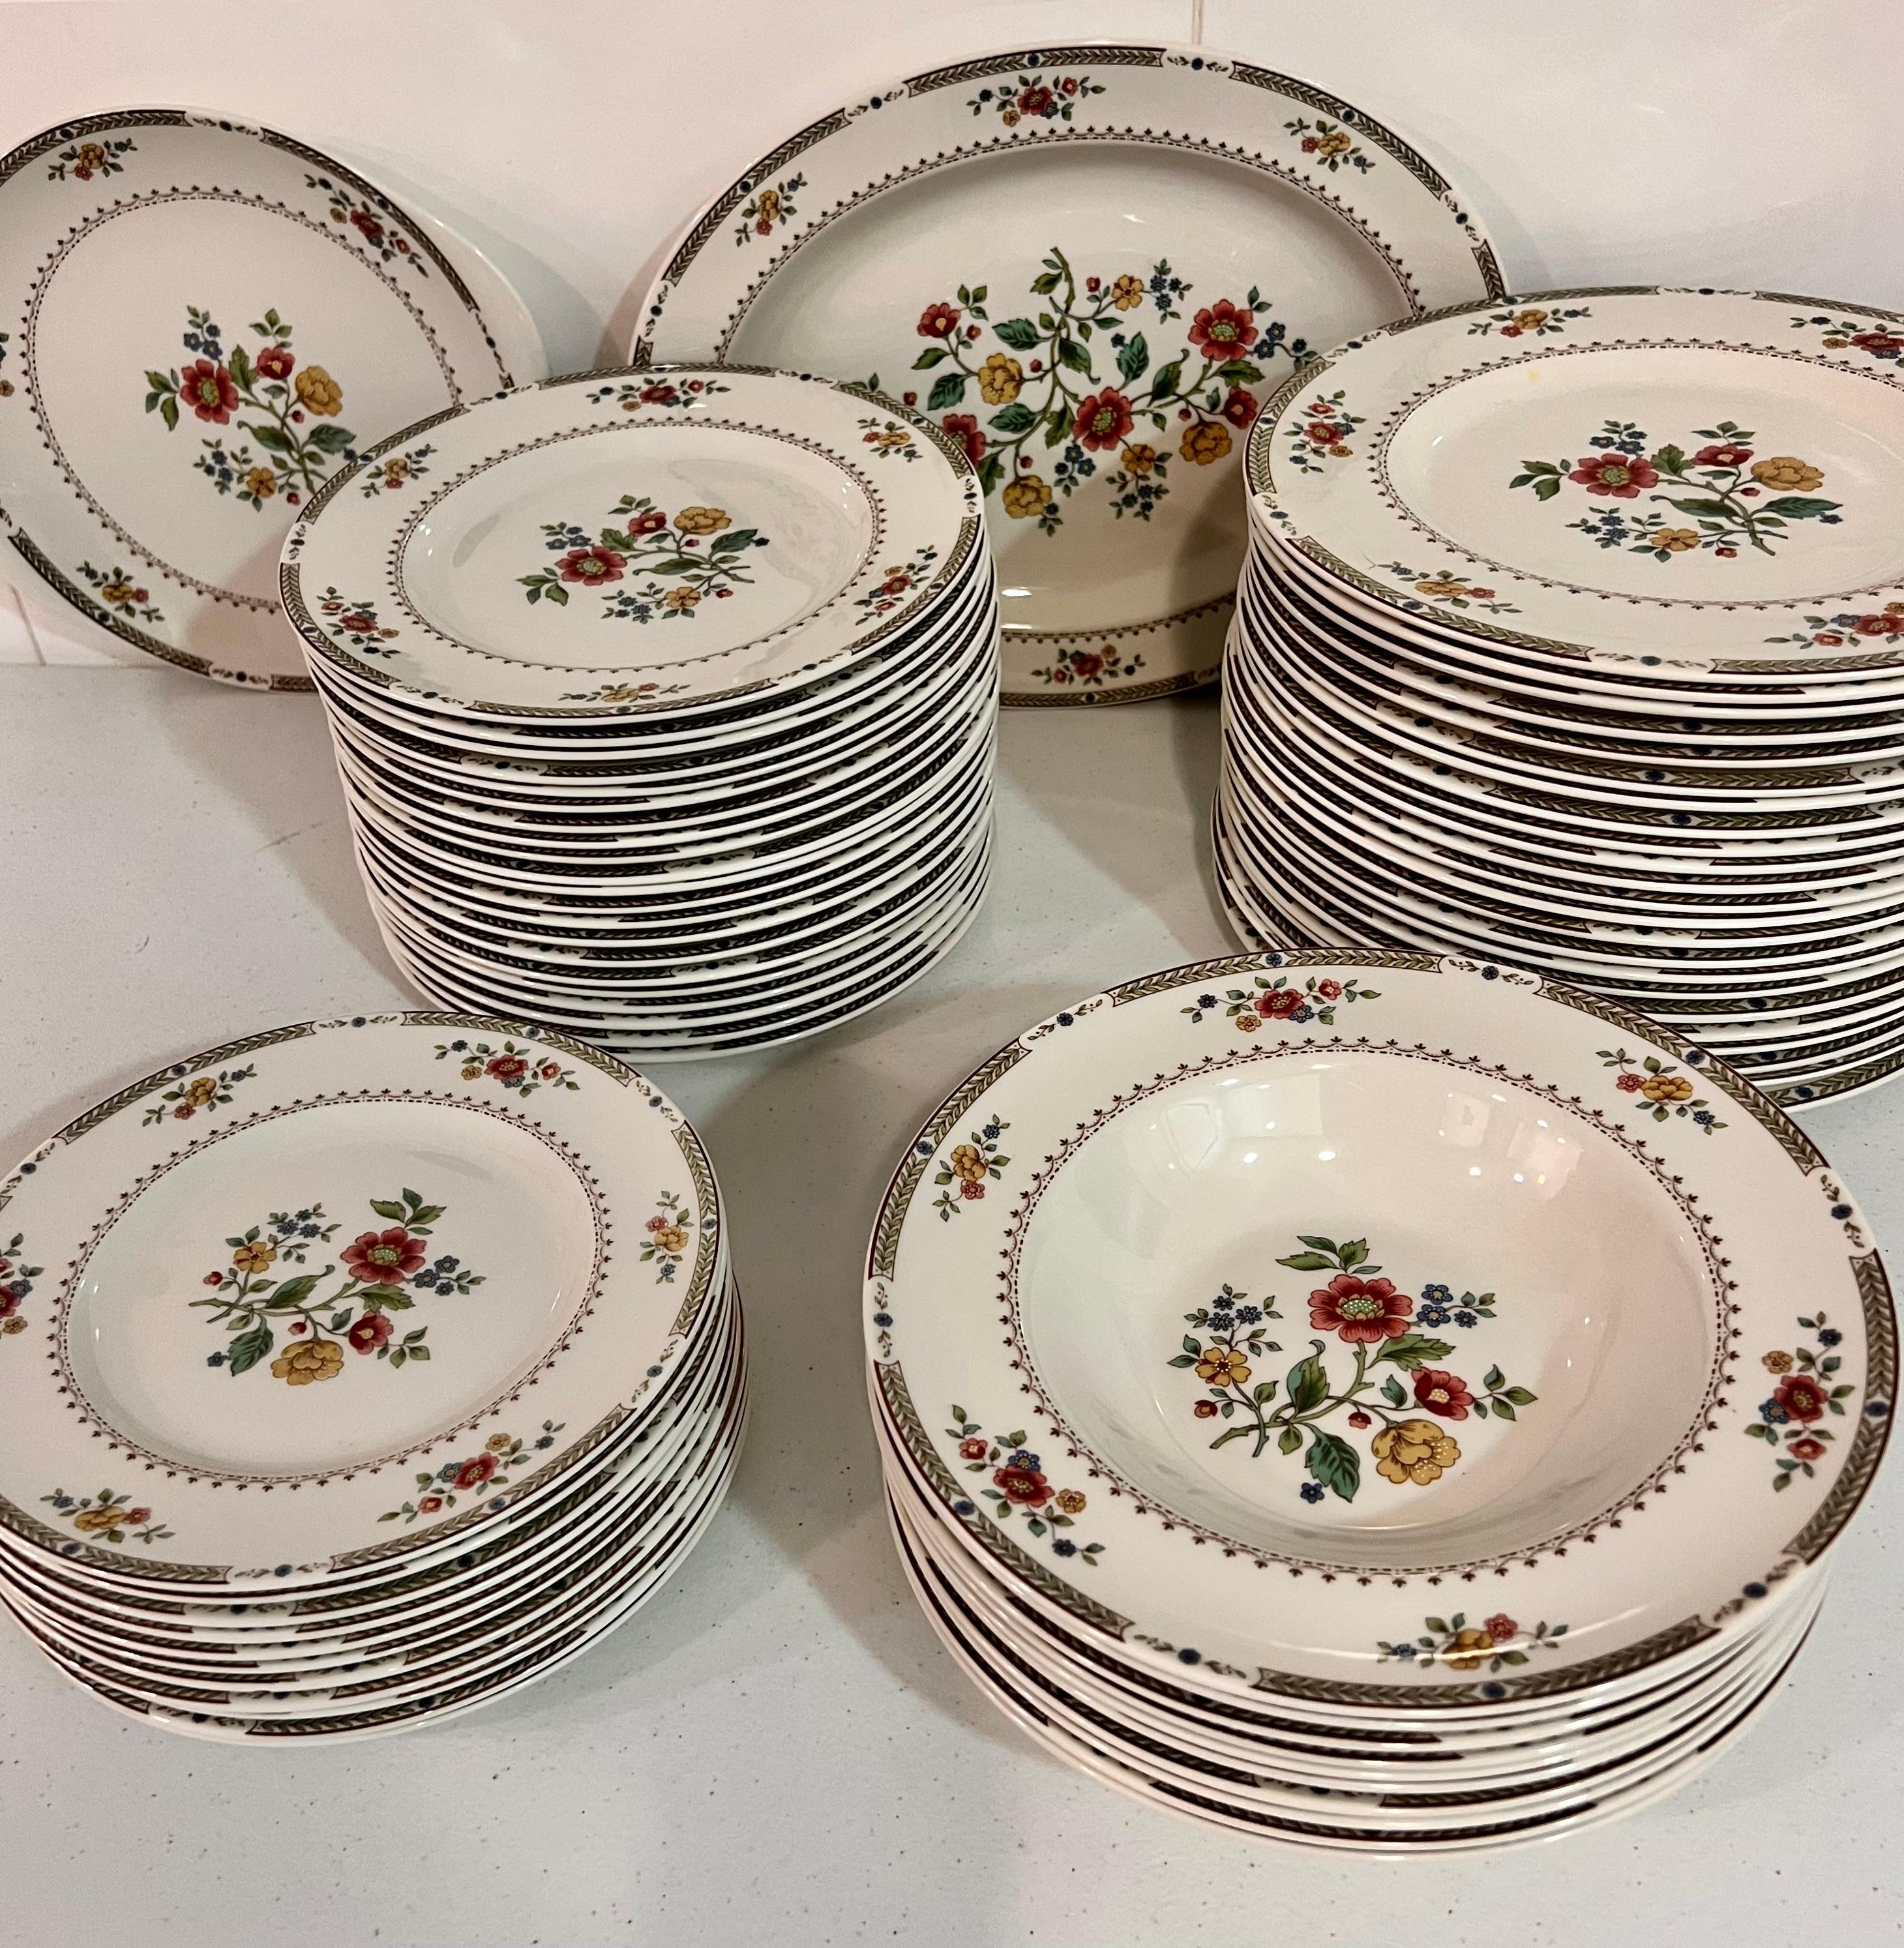 Flat Cup & Sauce set replacement flatware and dinnerware Royal Doulton Kingswood floral design

Measures: Height: 2 7/8 in
Width: 3 3/8 in
Hand Wash

Request info for flatware and diner ware 
we sell them individually or in sets
We have a